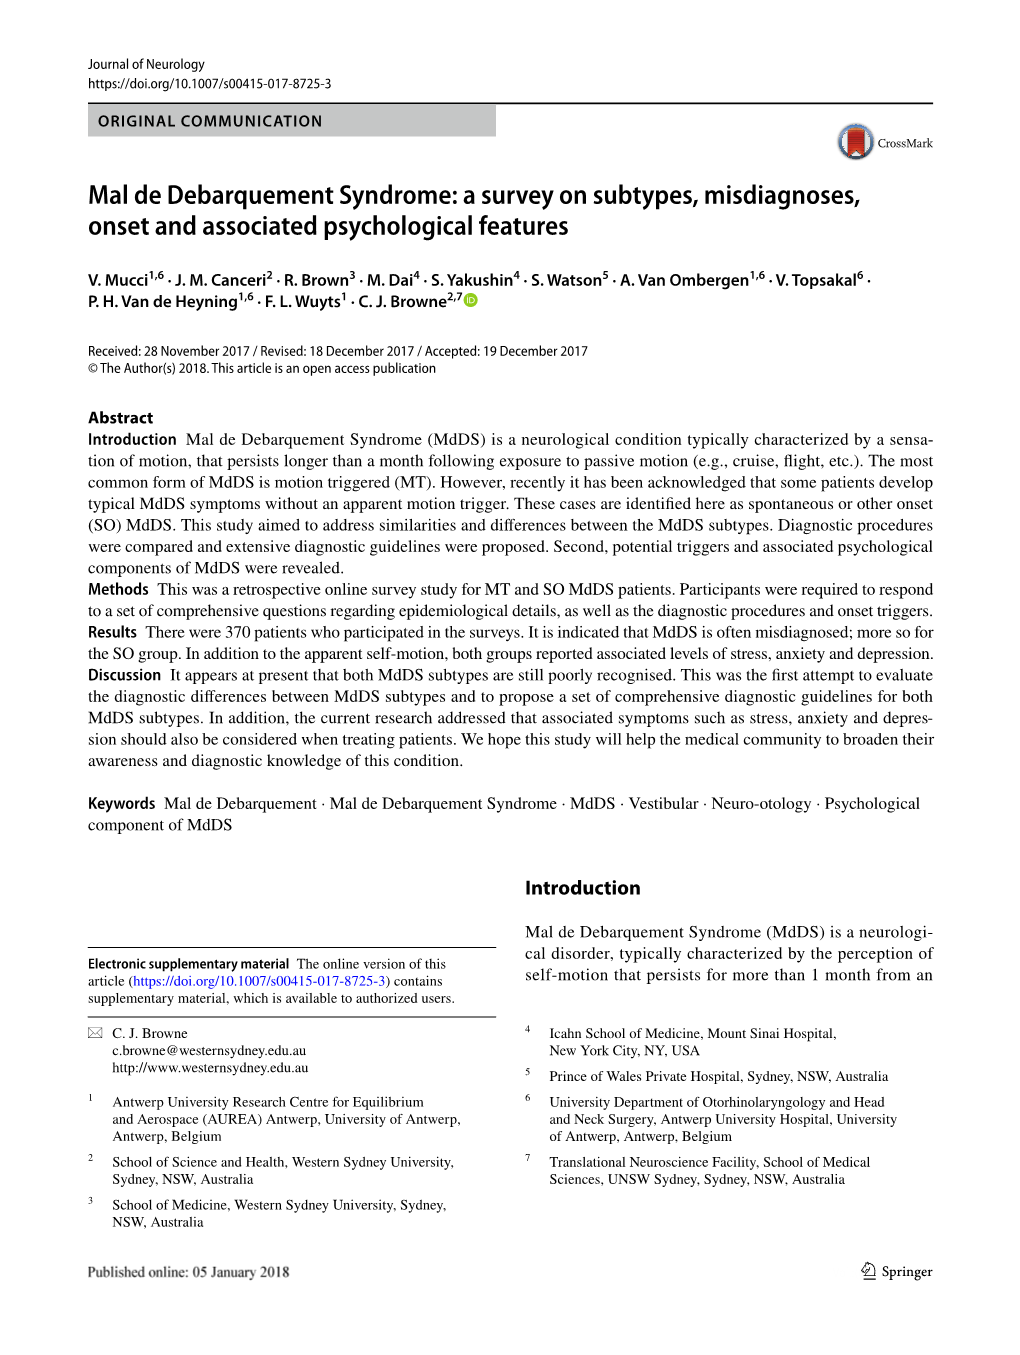 Mal De Debarquement Syndrome: a Survey on Subtypes, Misdiagnoses, Onset and Associated Psychological Features